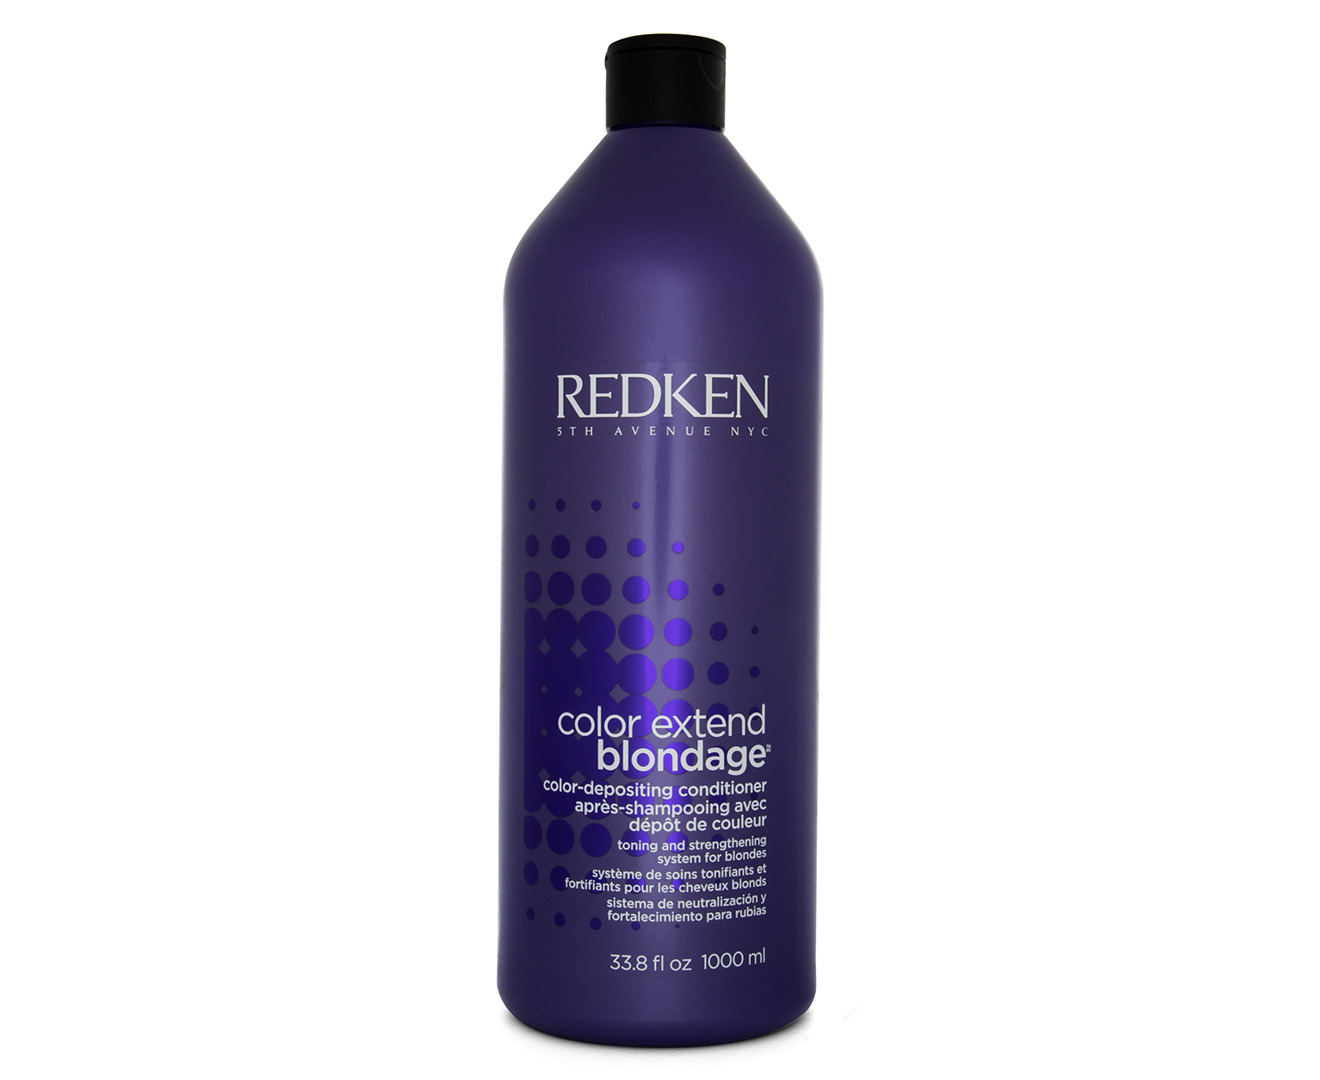 4. Redken Color Extend Blondage Shampoo and Conditioner - wide 9